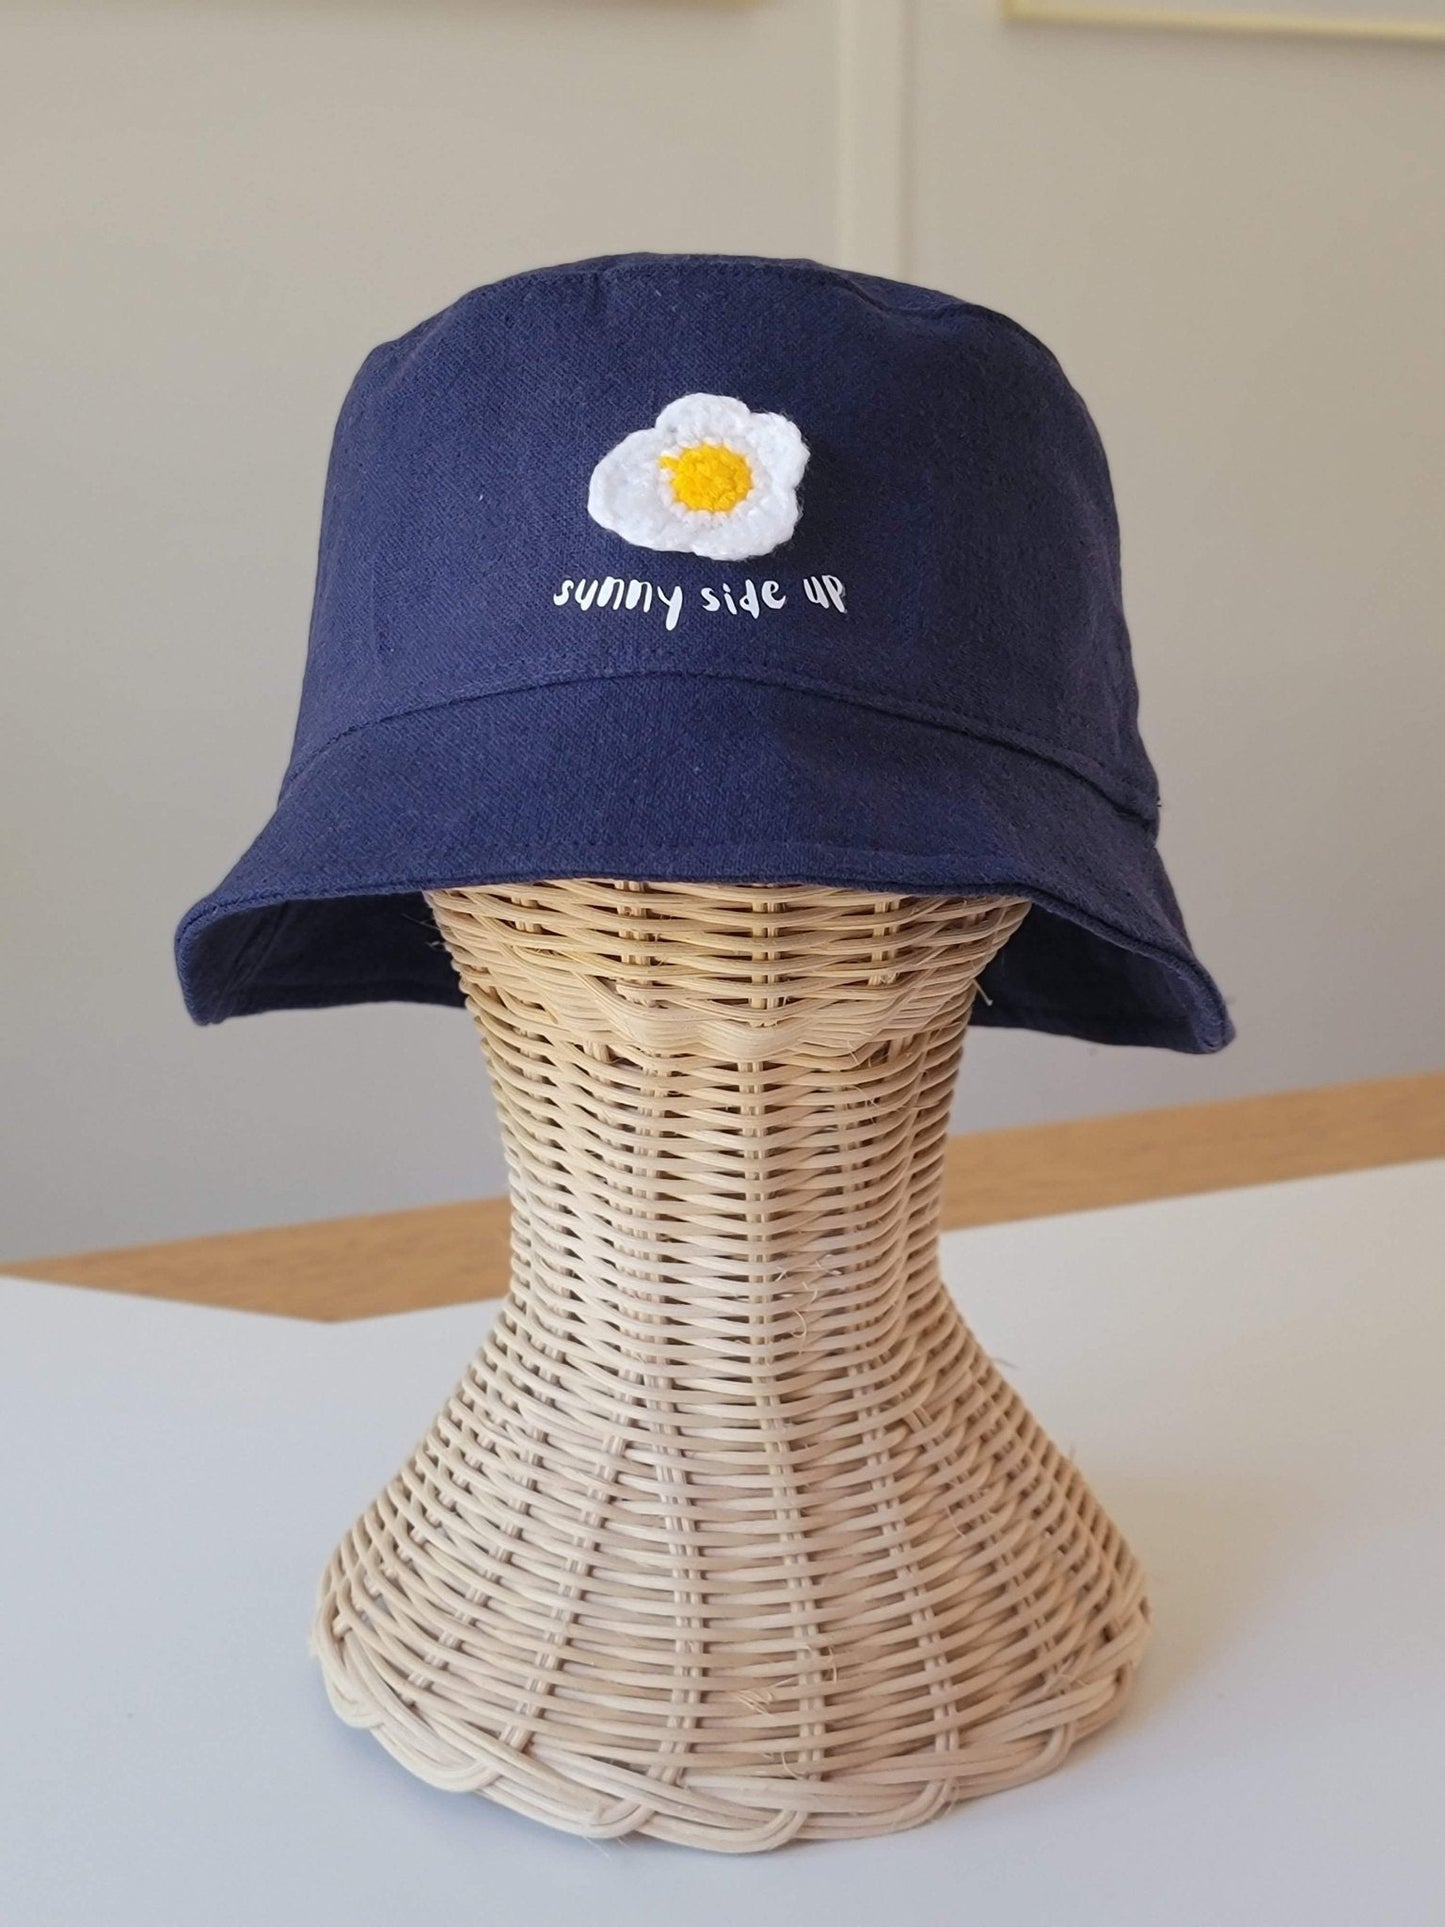 Bucket hat-Sunny side up-1